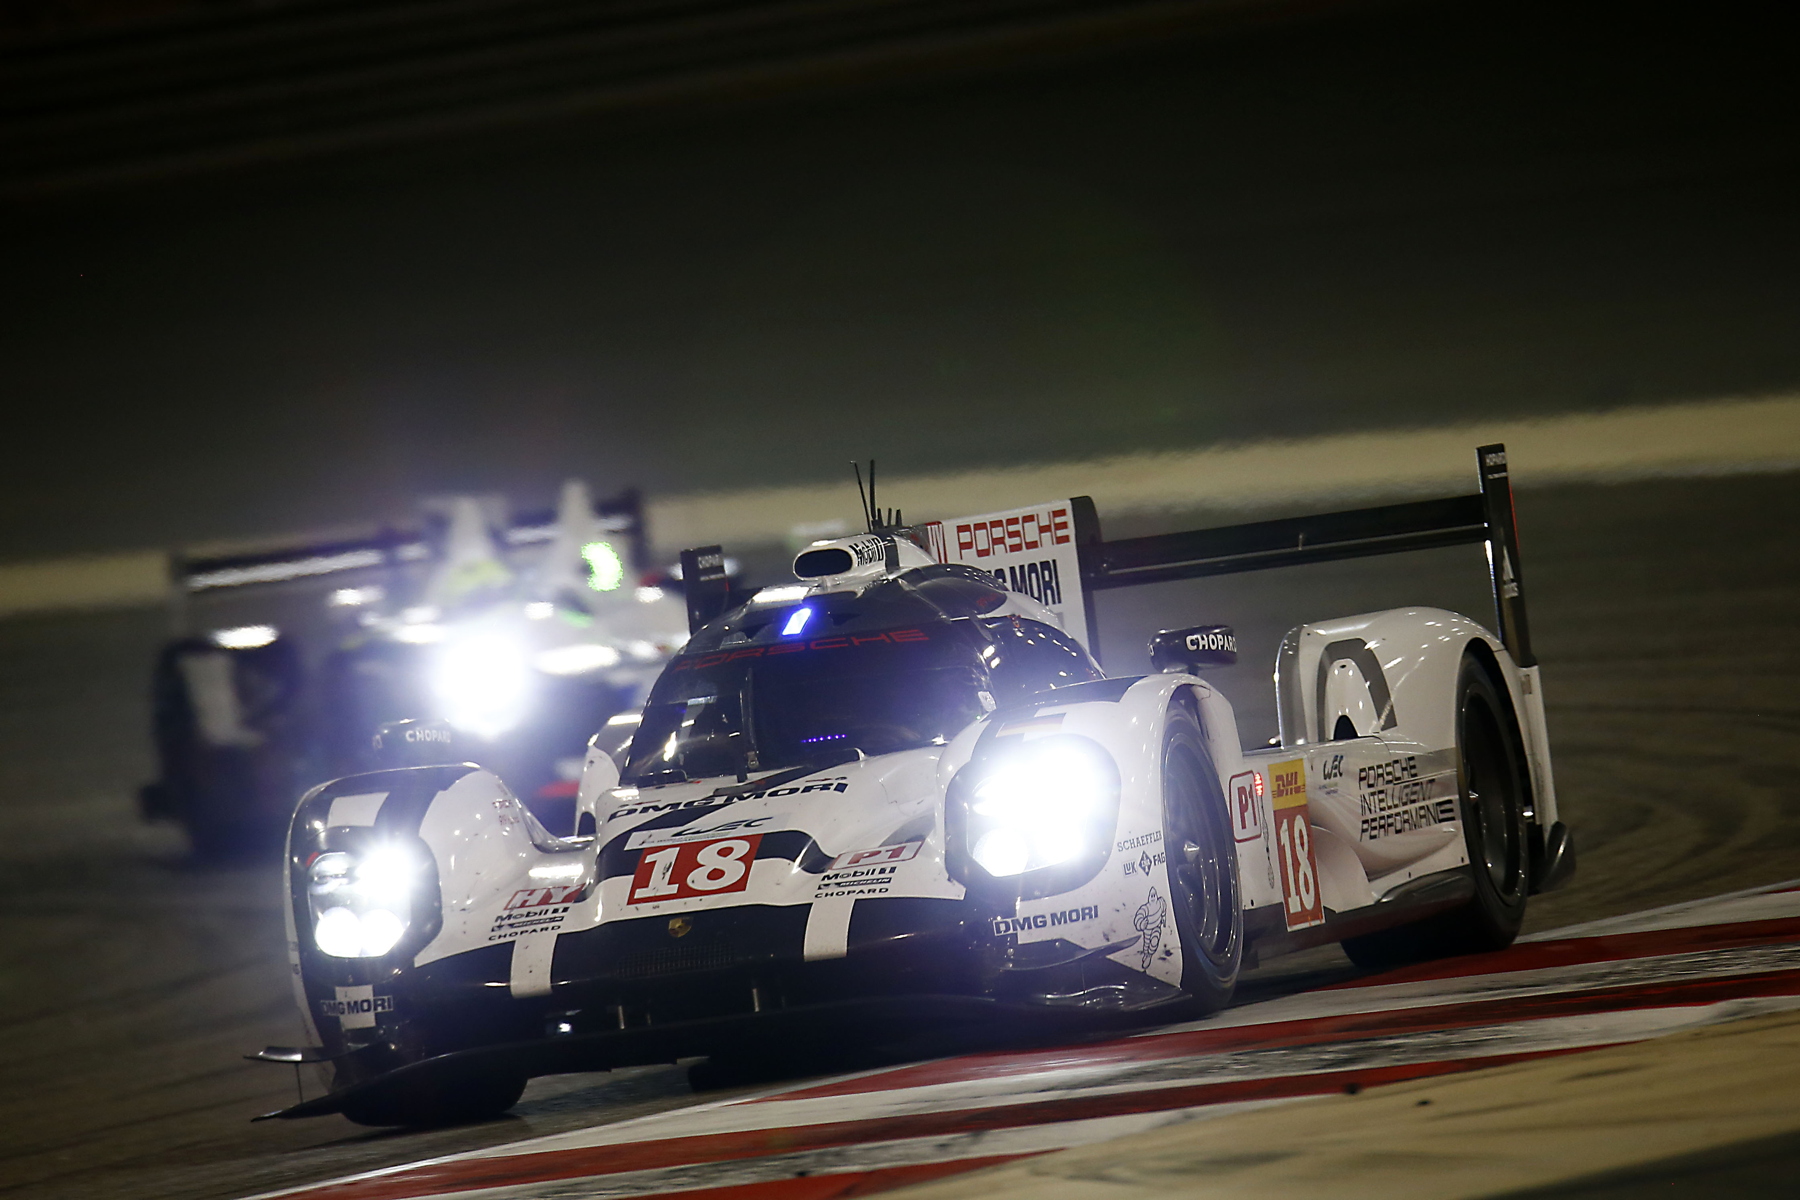 After a difficult season for Jani, Lieb and Dumas, the no. 18 Porsche's triumph was just rewards.